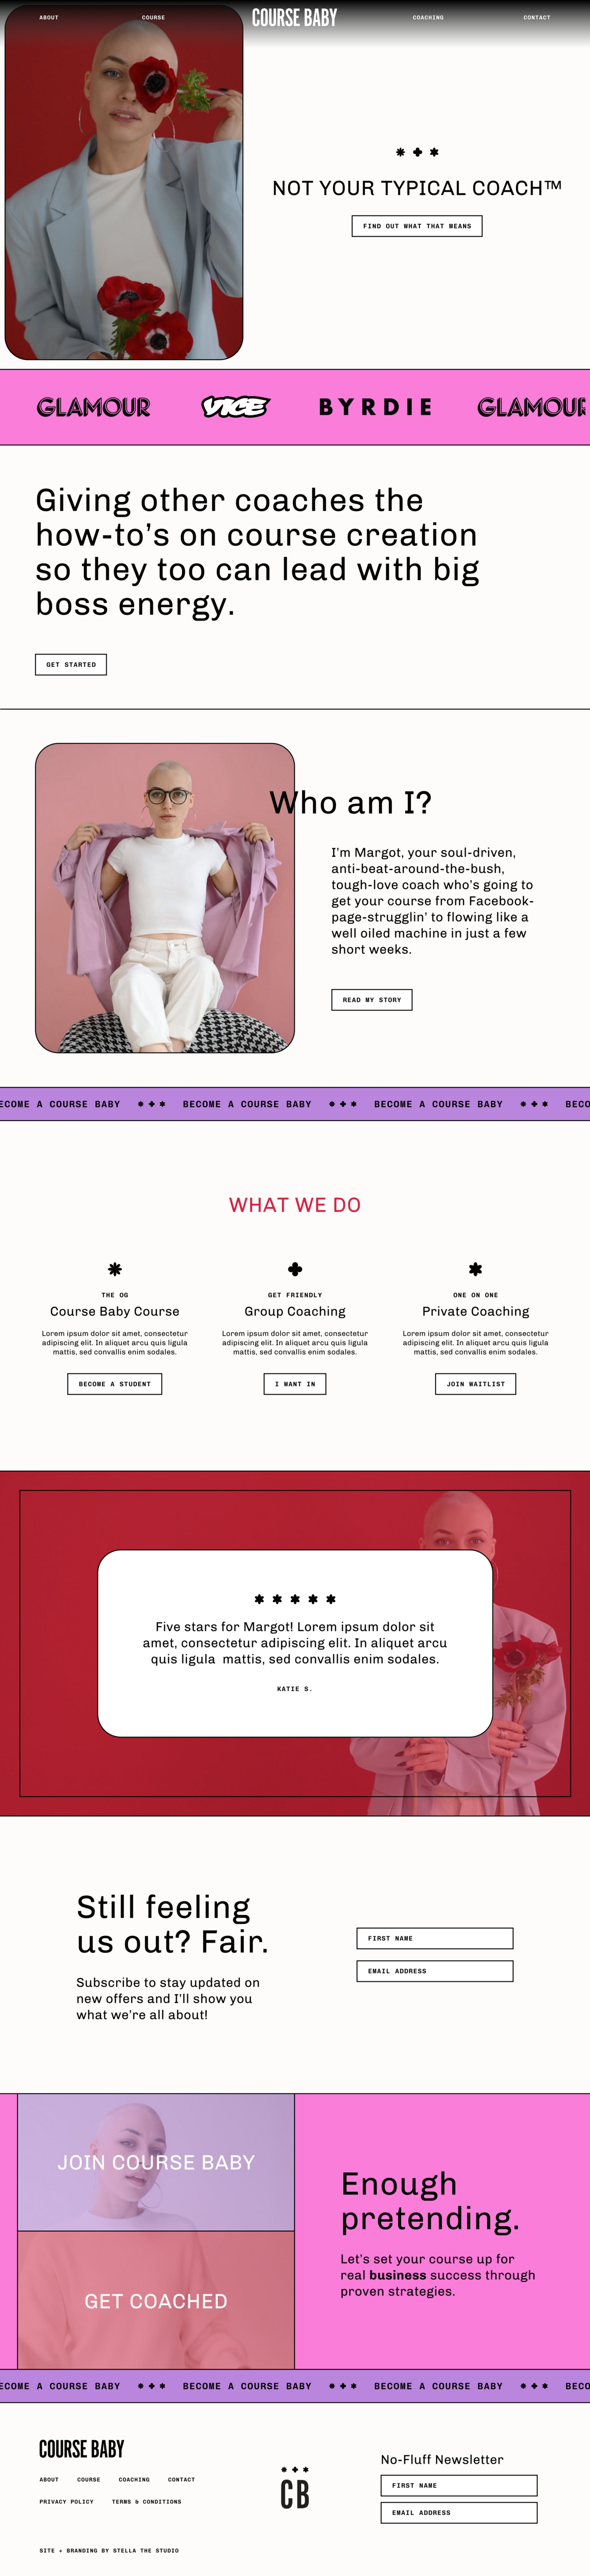 website design for course baby, the website is bold and vibrant